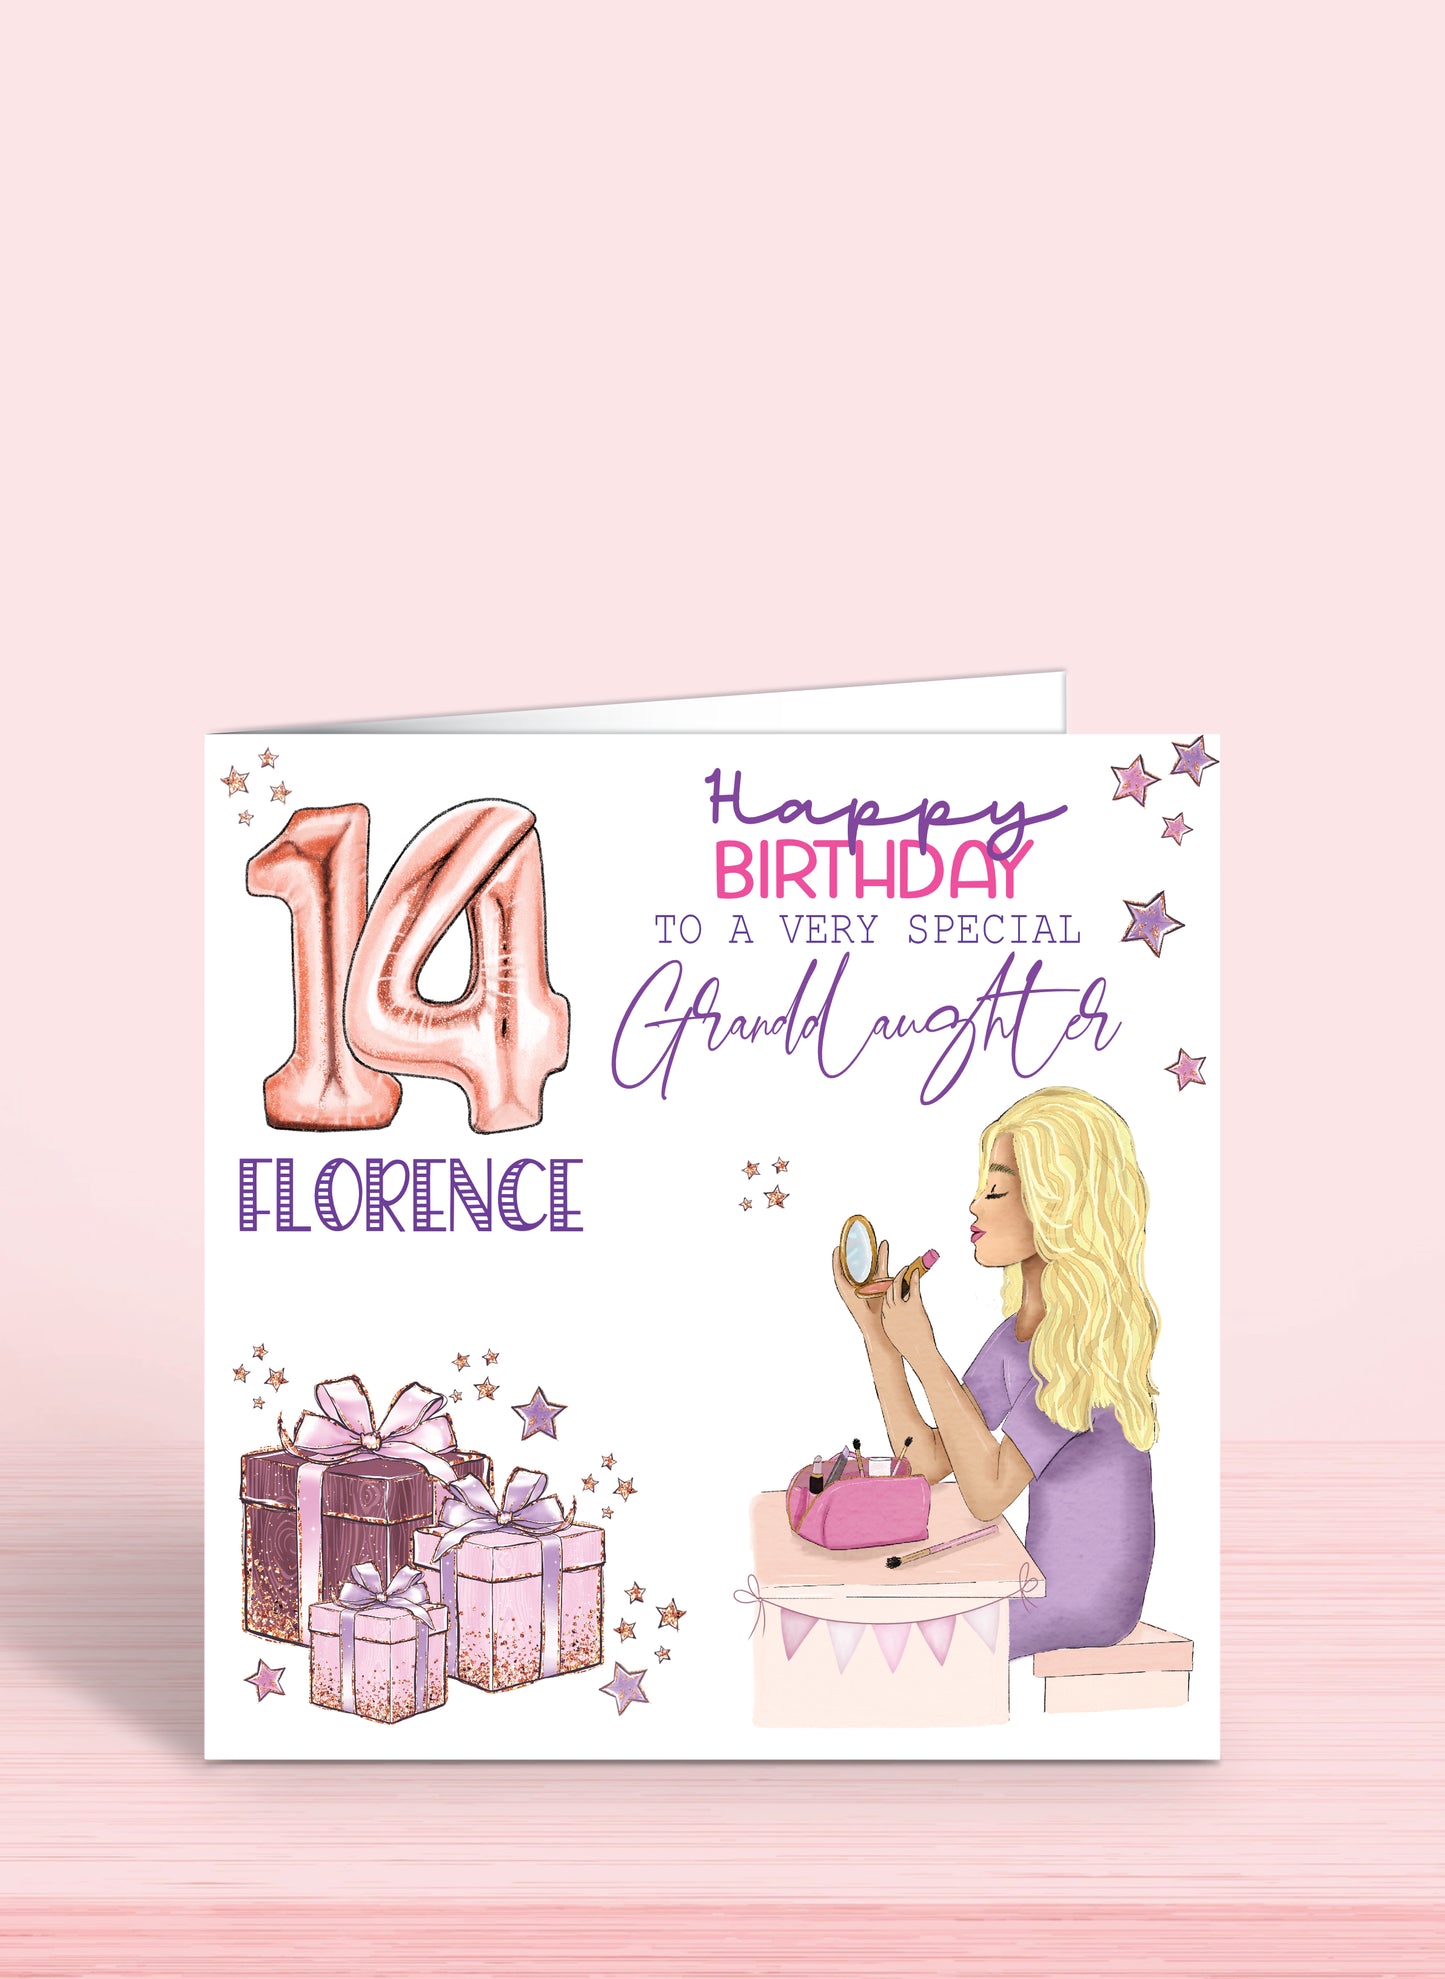 14th Birthday CGranddaughter Birthday Card, Girls Makeup Personalised 14th Birthday Card, 6 inches square, Happy Birthday To a very special Daughter, BLONDE HAIR or BROWN HAIR | Oliver Rose Designs